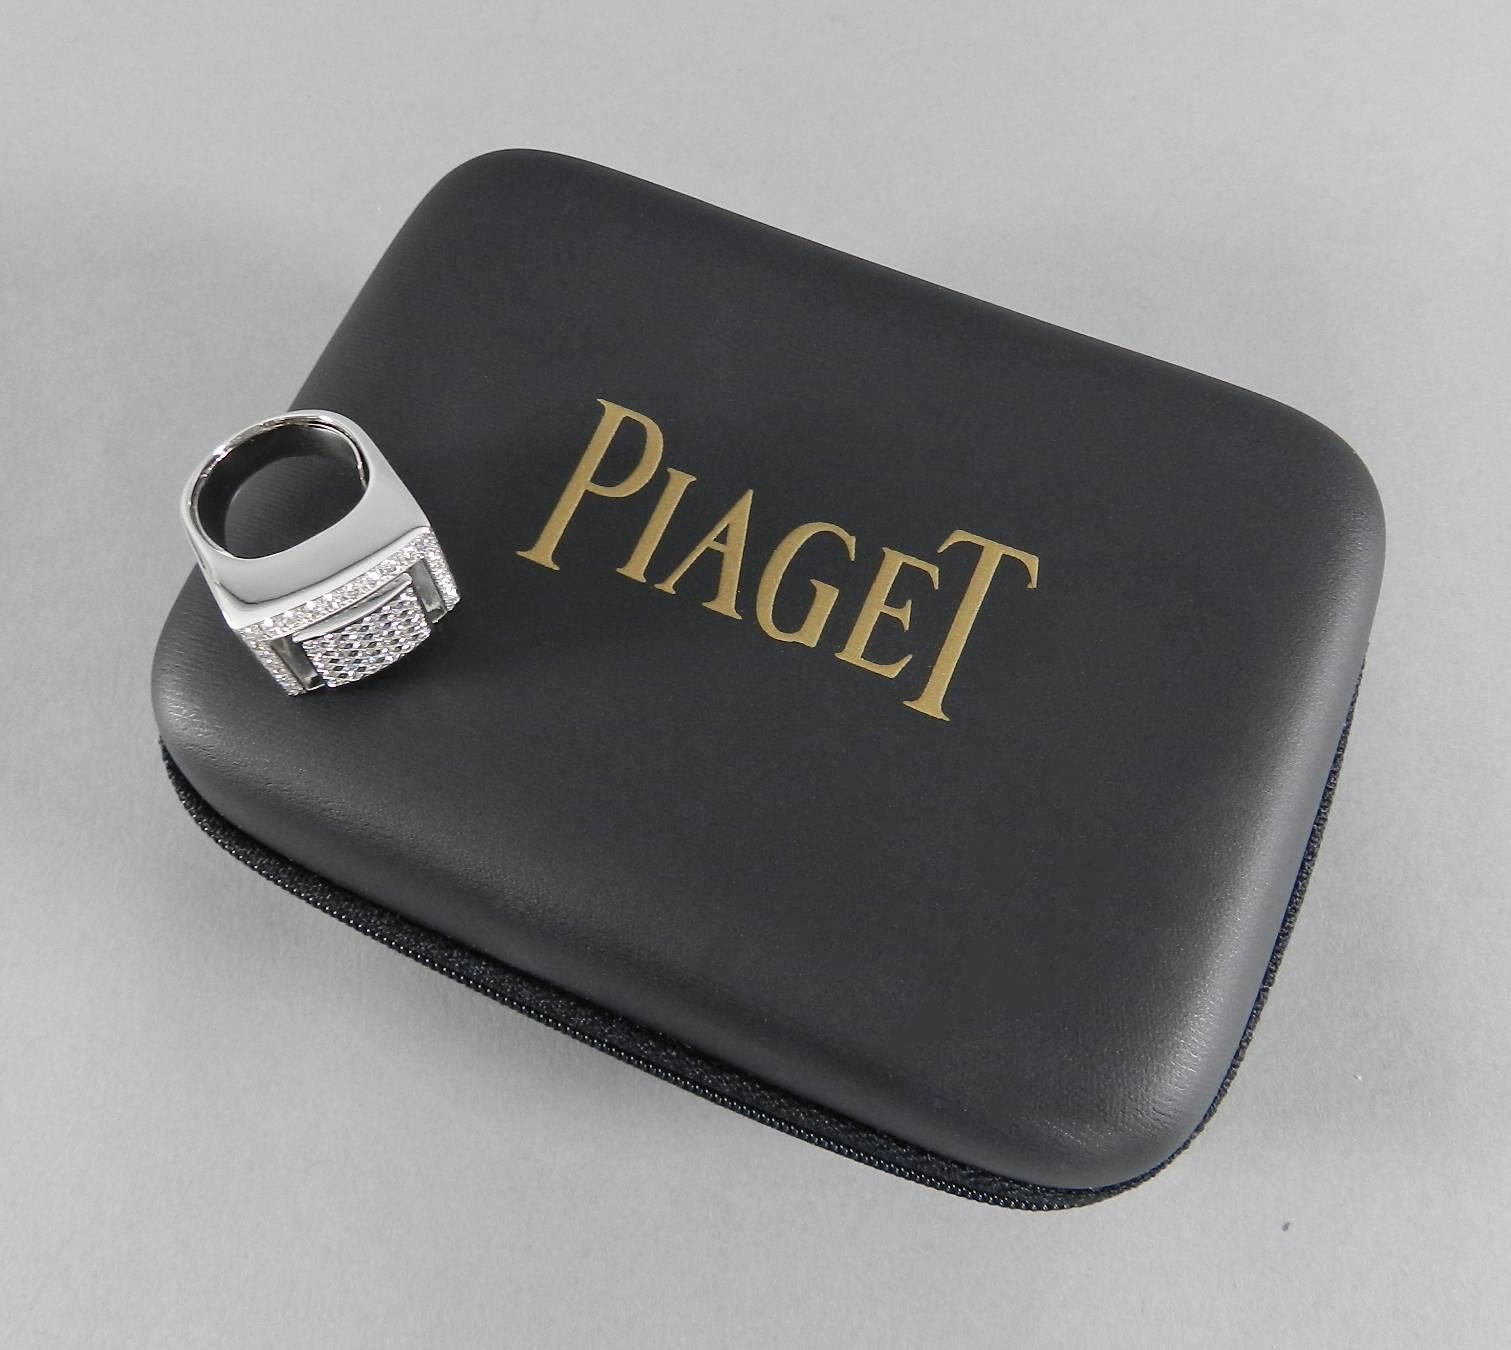 Piaget Limelight limited edition rare watch ring.  Orginal retail price was $31,500 USD (as shown in photo from the New York Times T Magazine in 2012).

Unique flip design with watch face on one side and diamond face on the other.  Hinged diamond